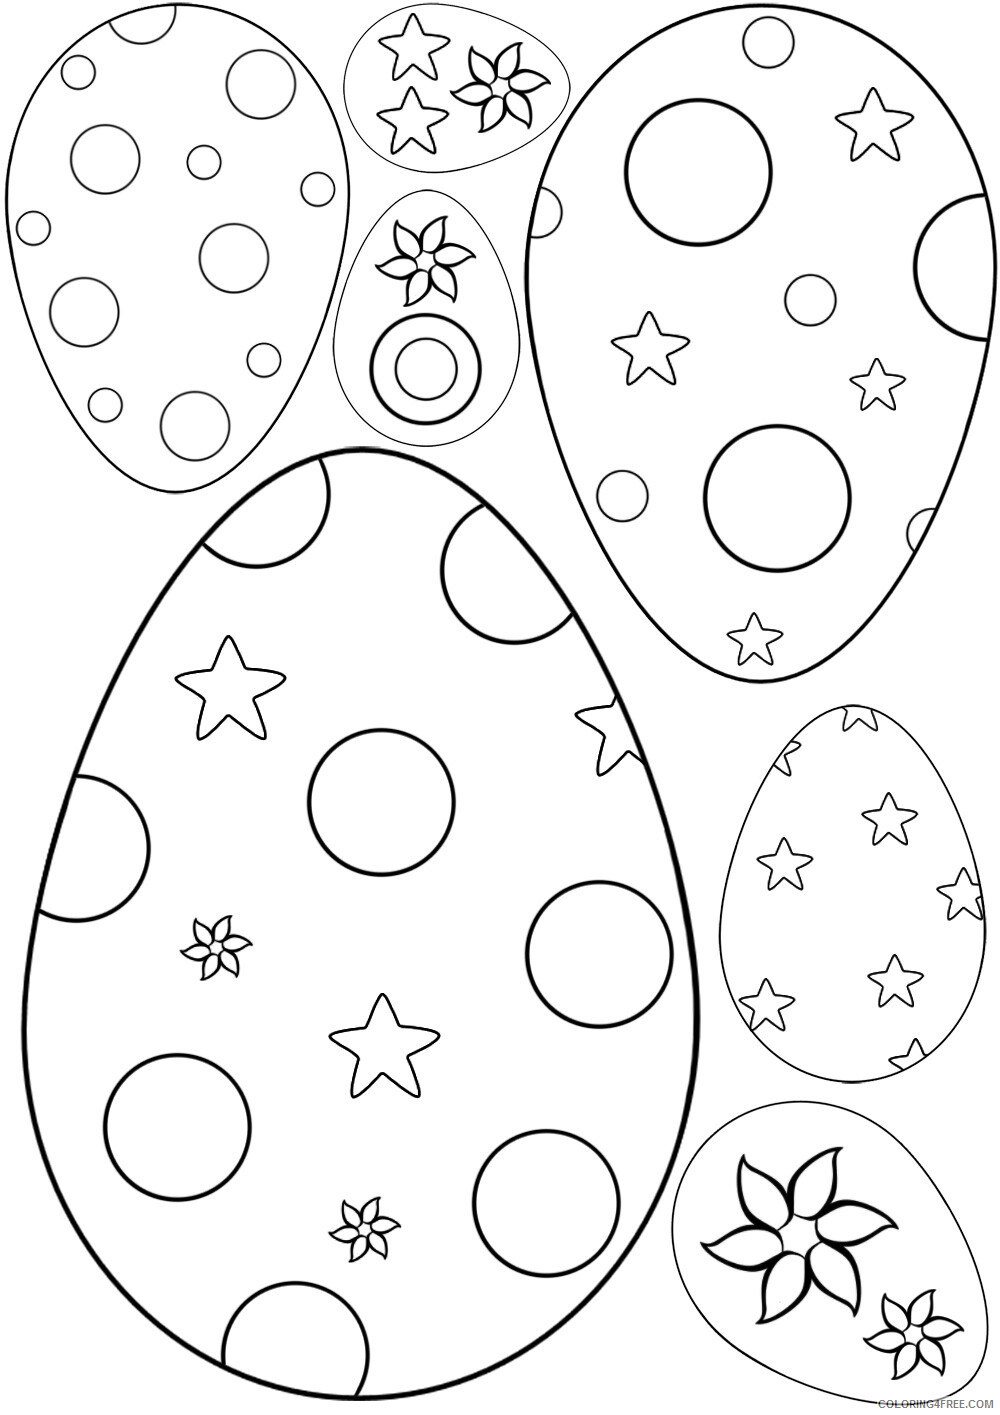 Easter Egg Coloring Pages Holiday Color Easter Eggs Activity Printable 2021 0467 Coloring4free